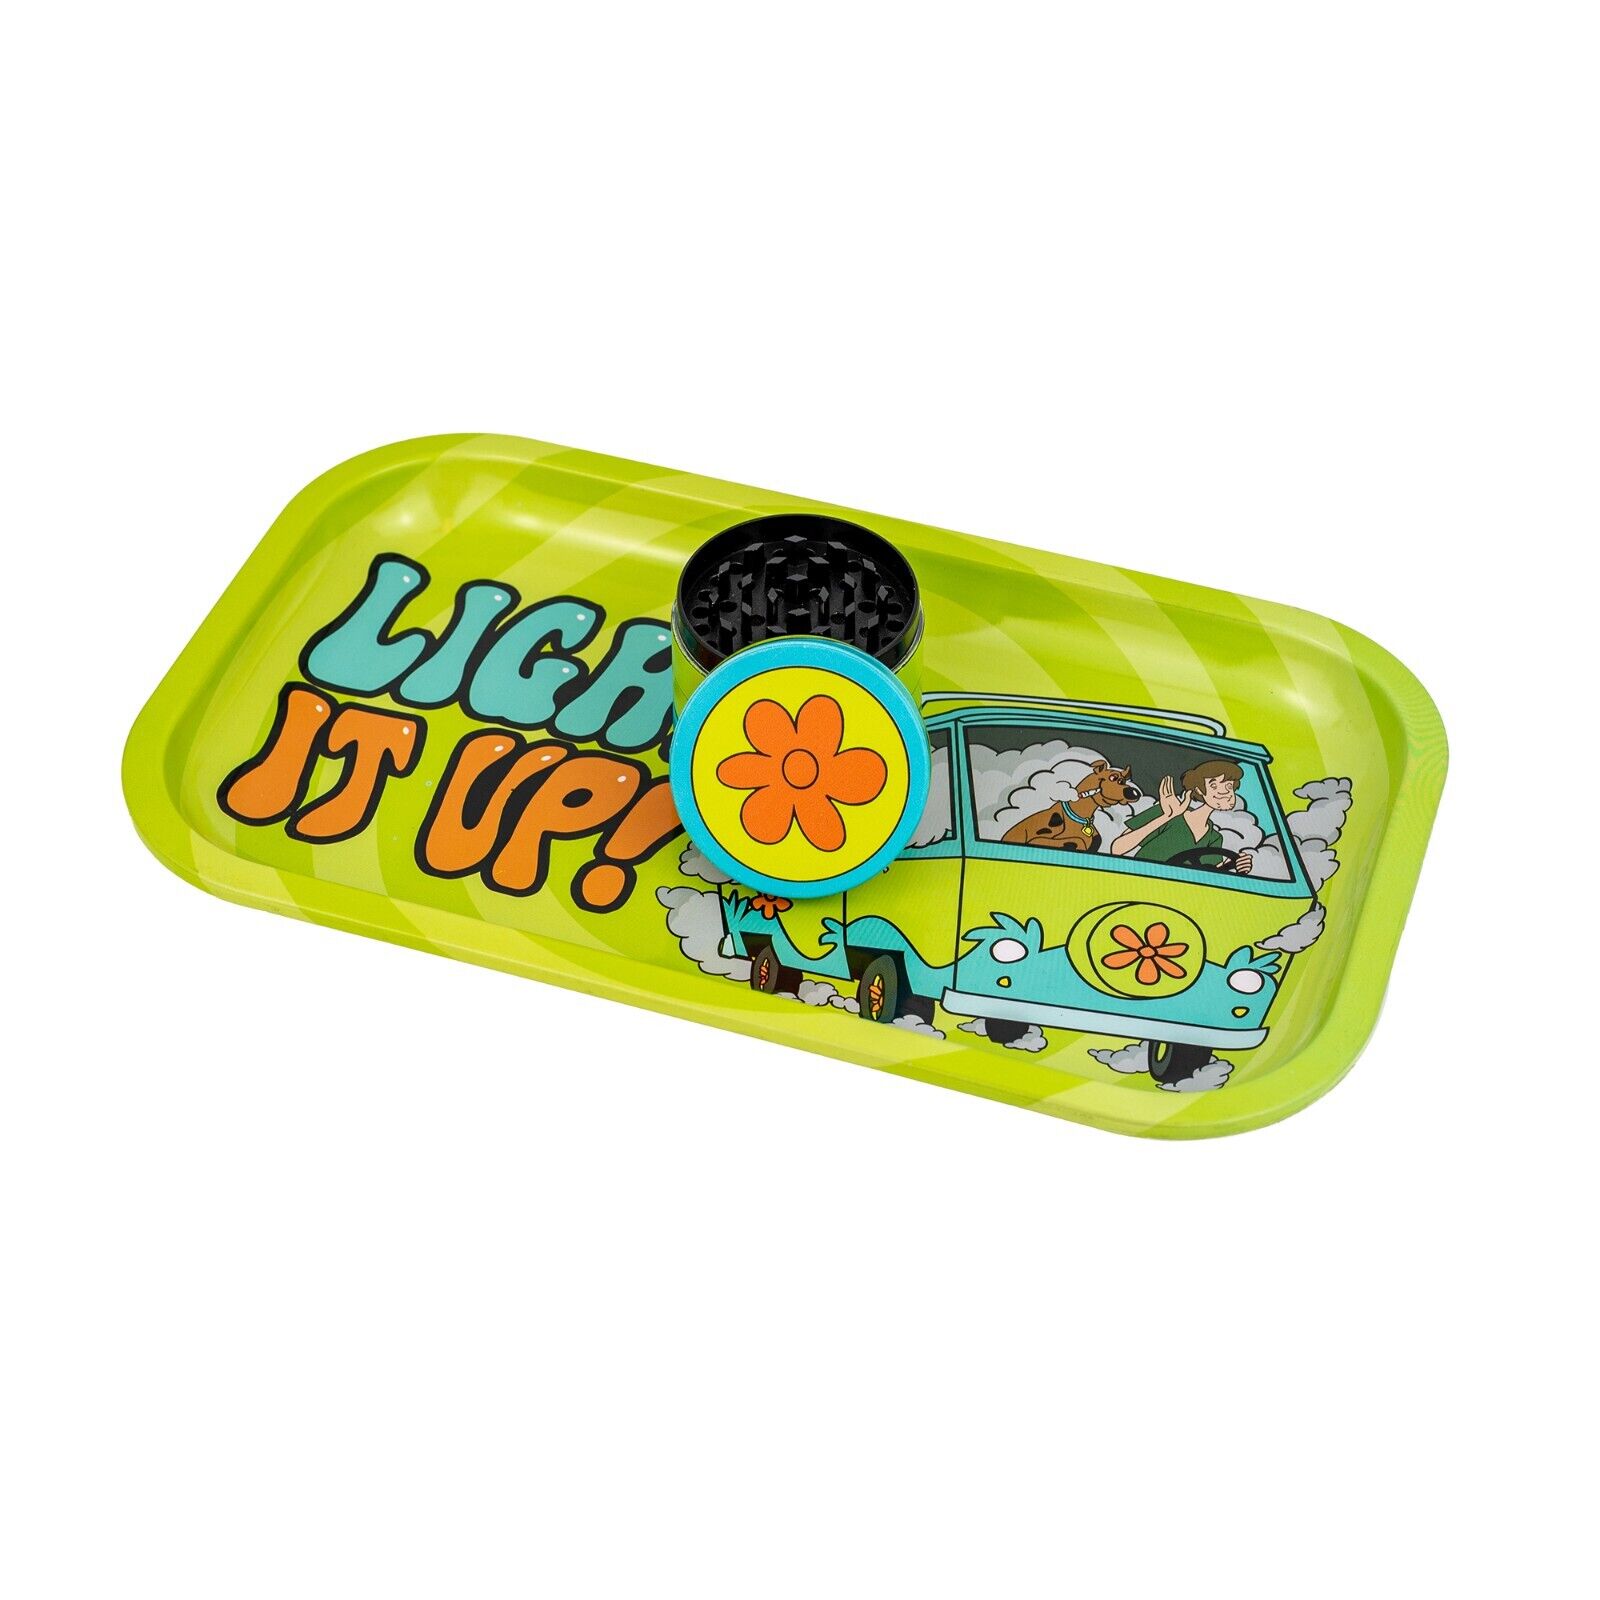 Rolling Tray Set | Shaggy & Scooby in Mystery Bus Tray with Matching Grinder - M